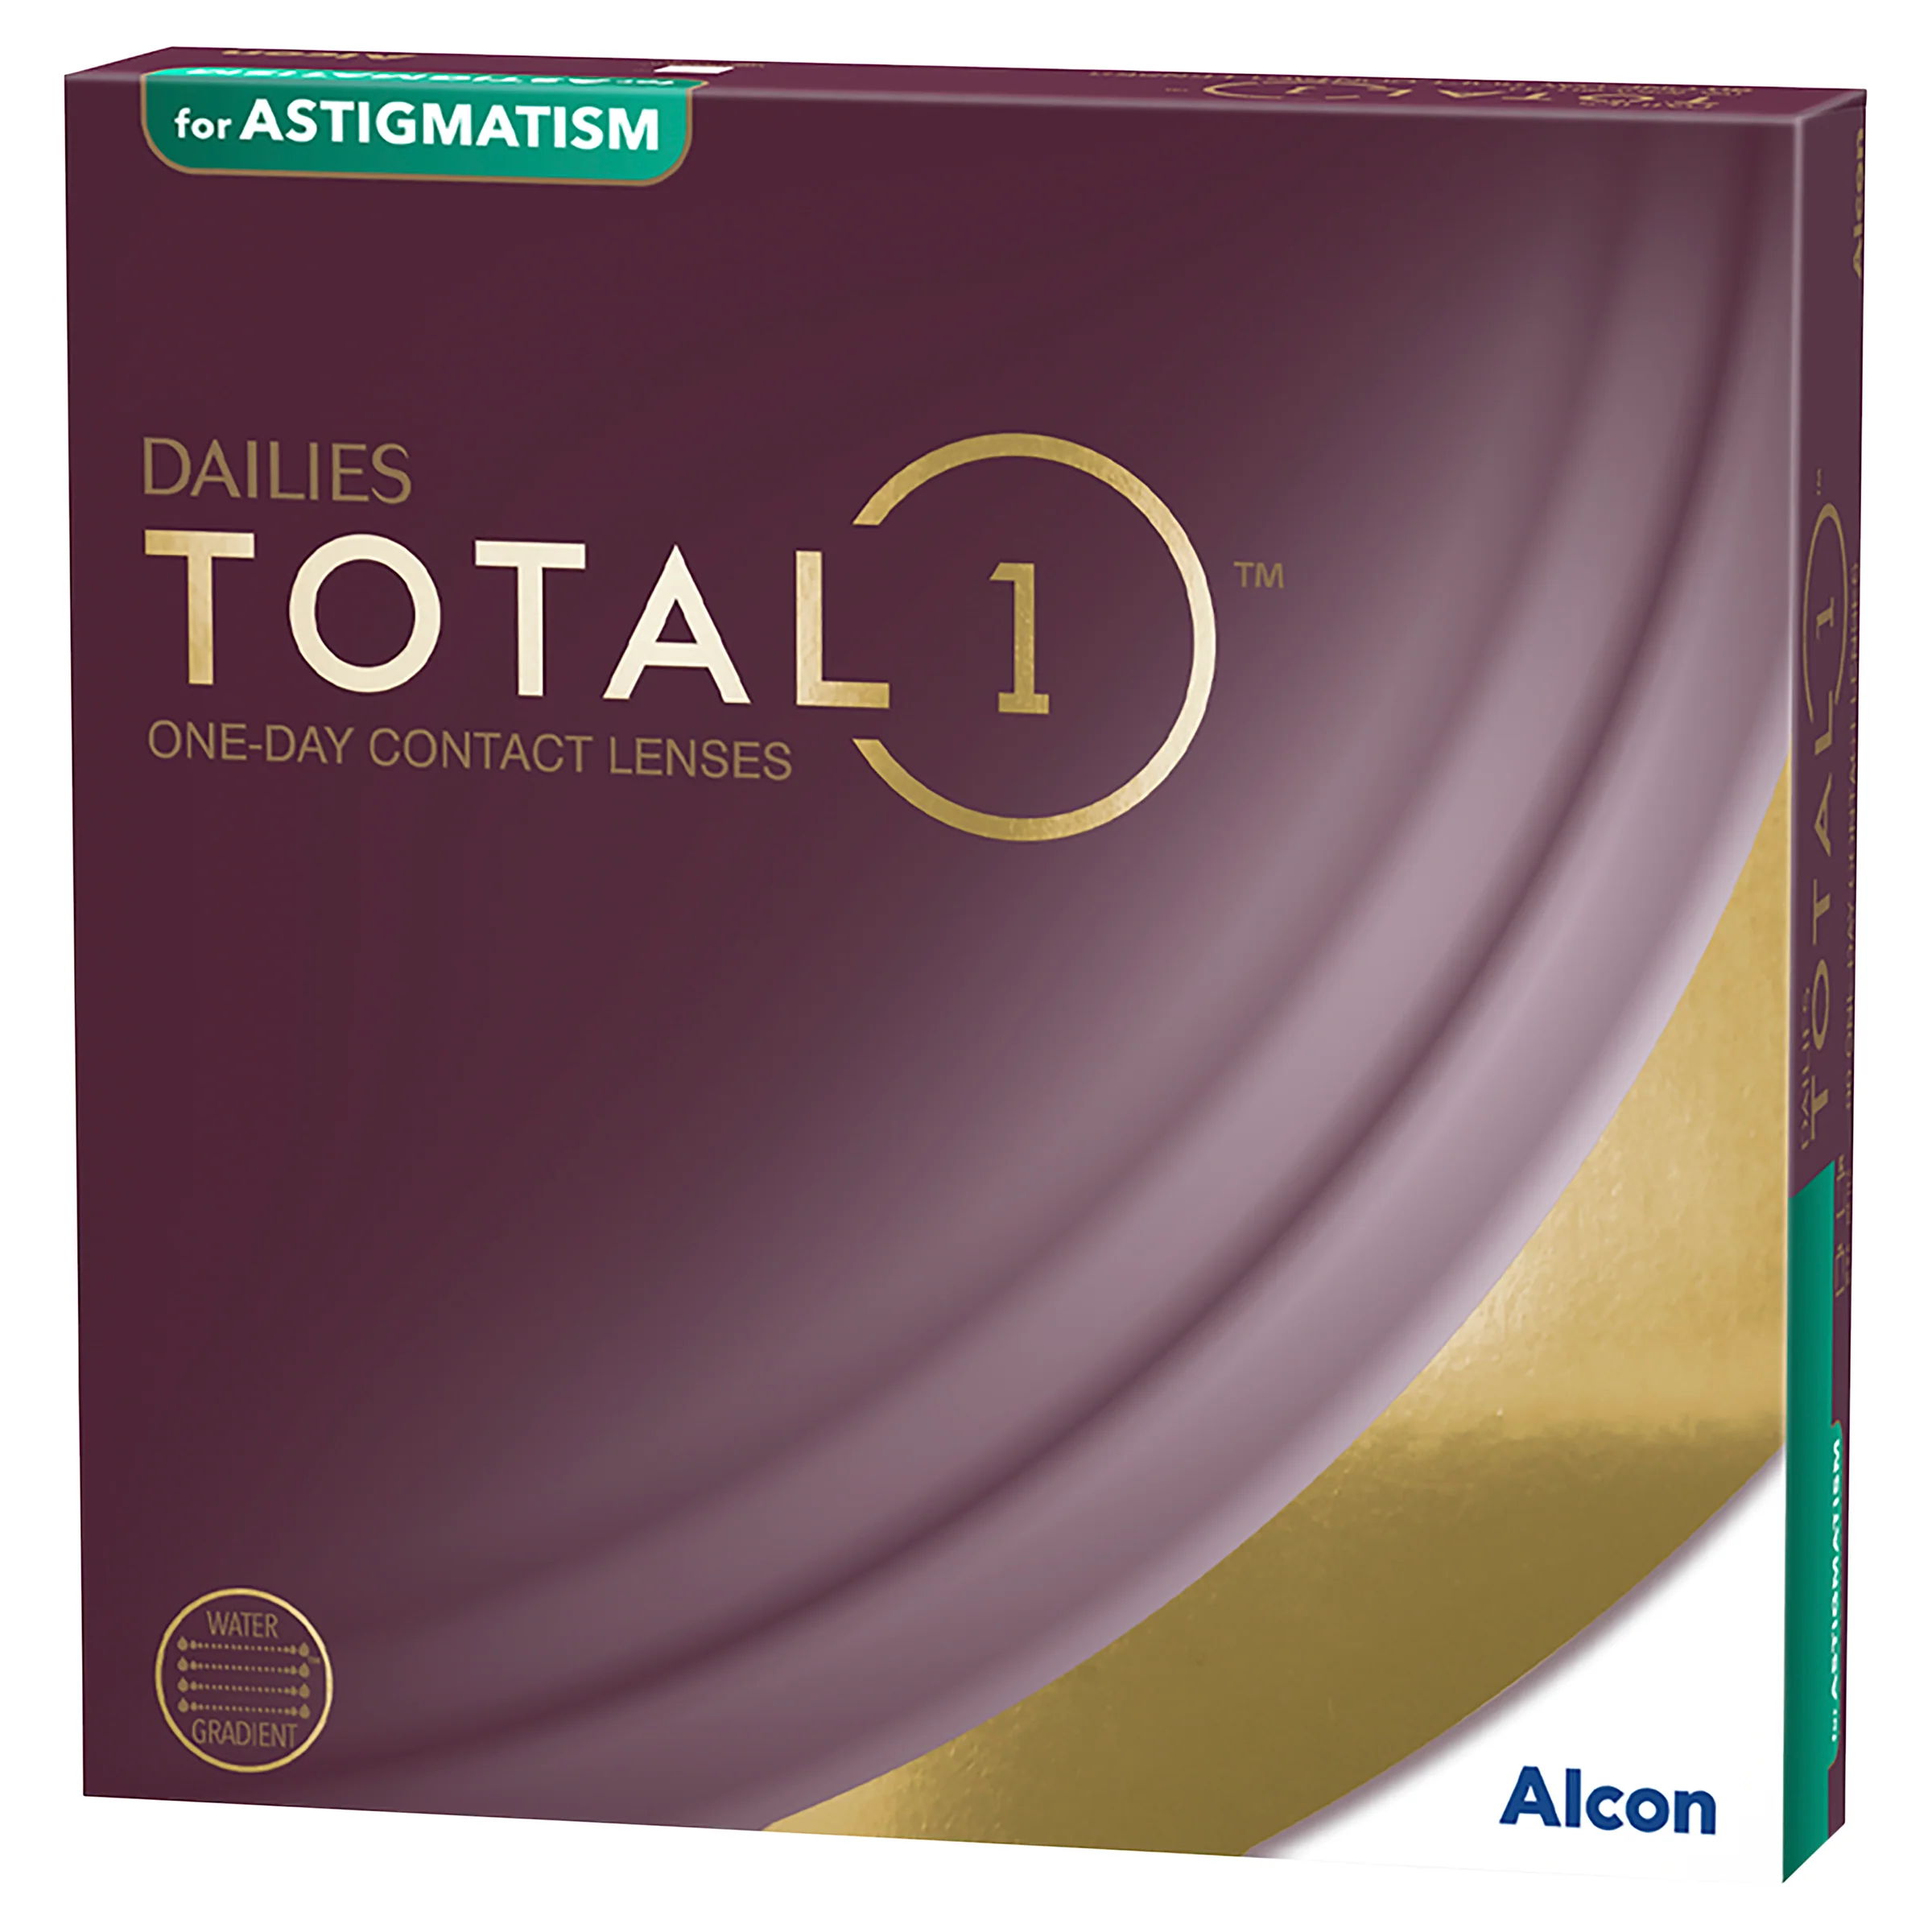 Dailies Total 1 with Astigmatism (90K) $165